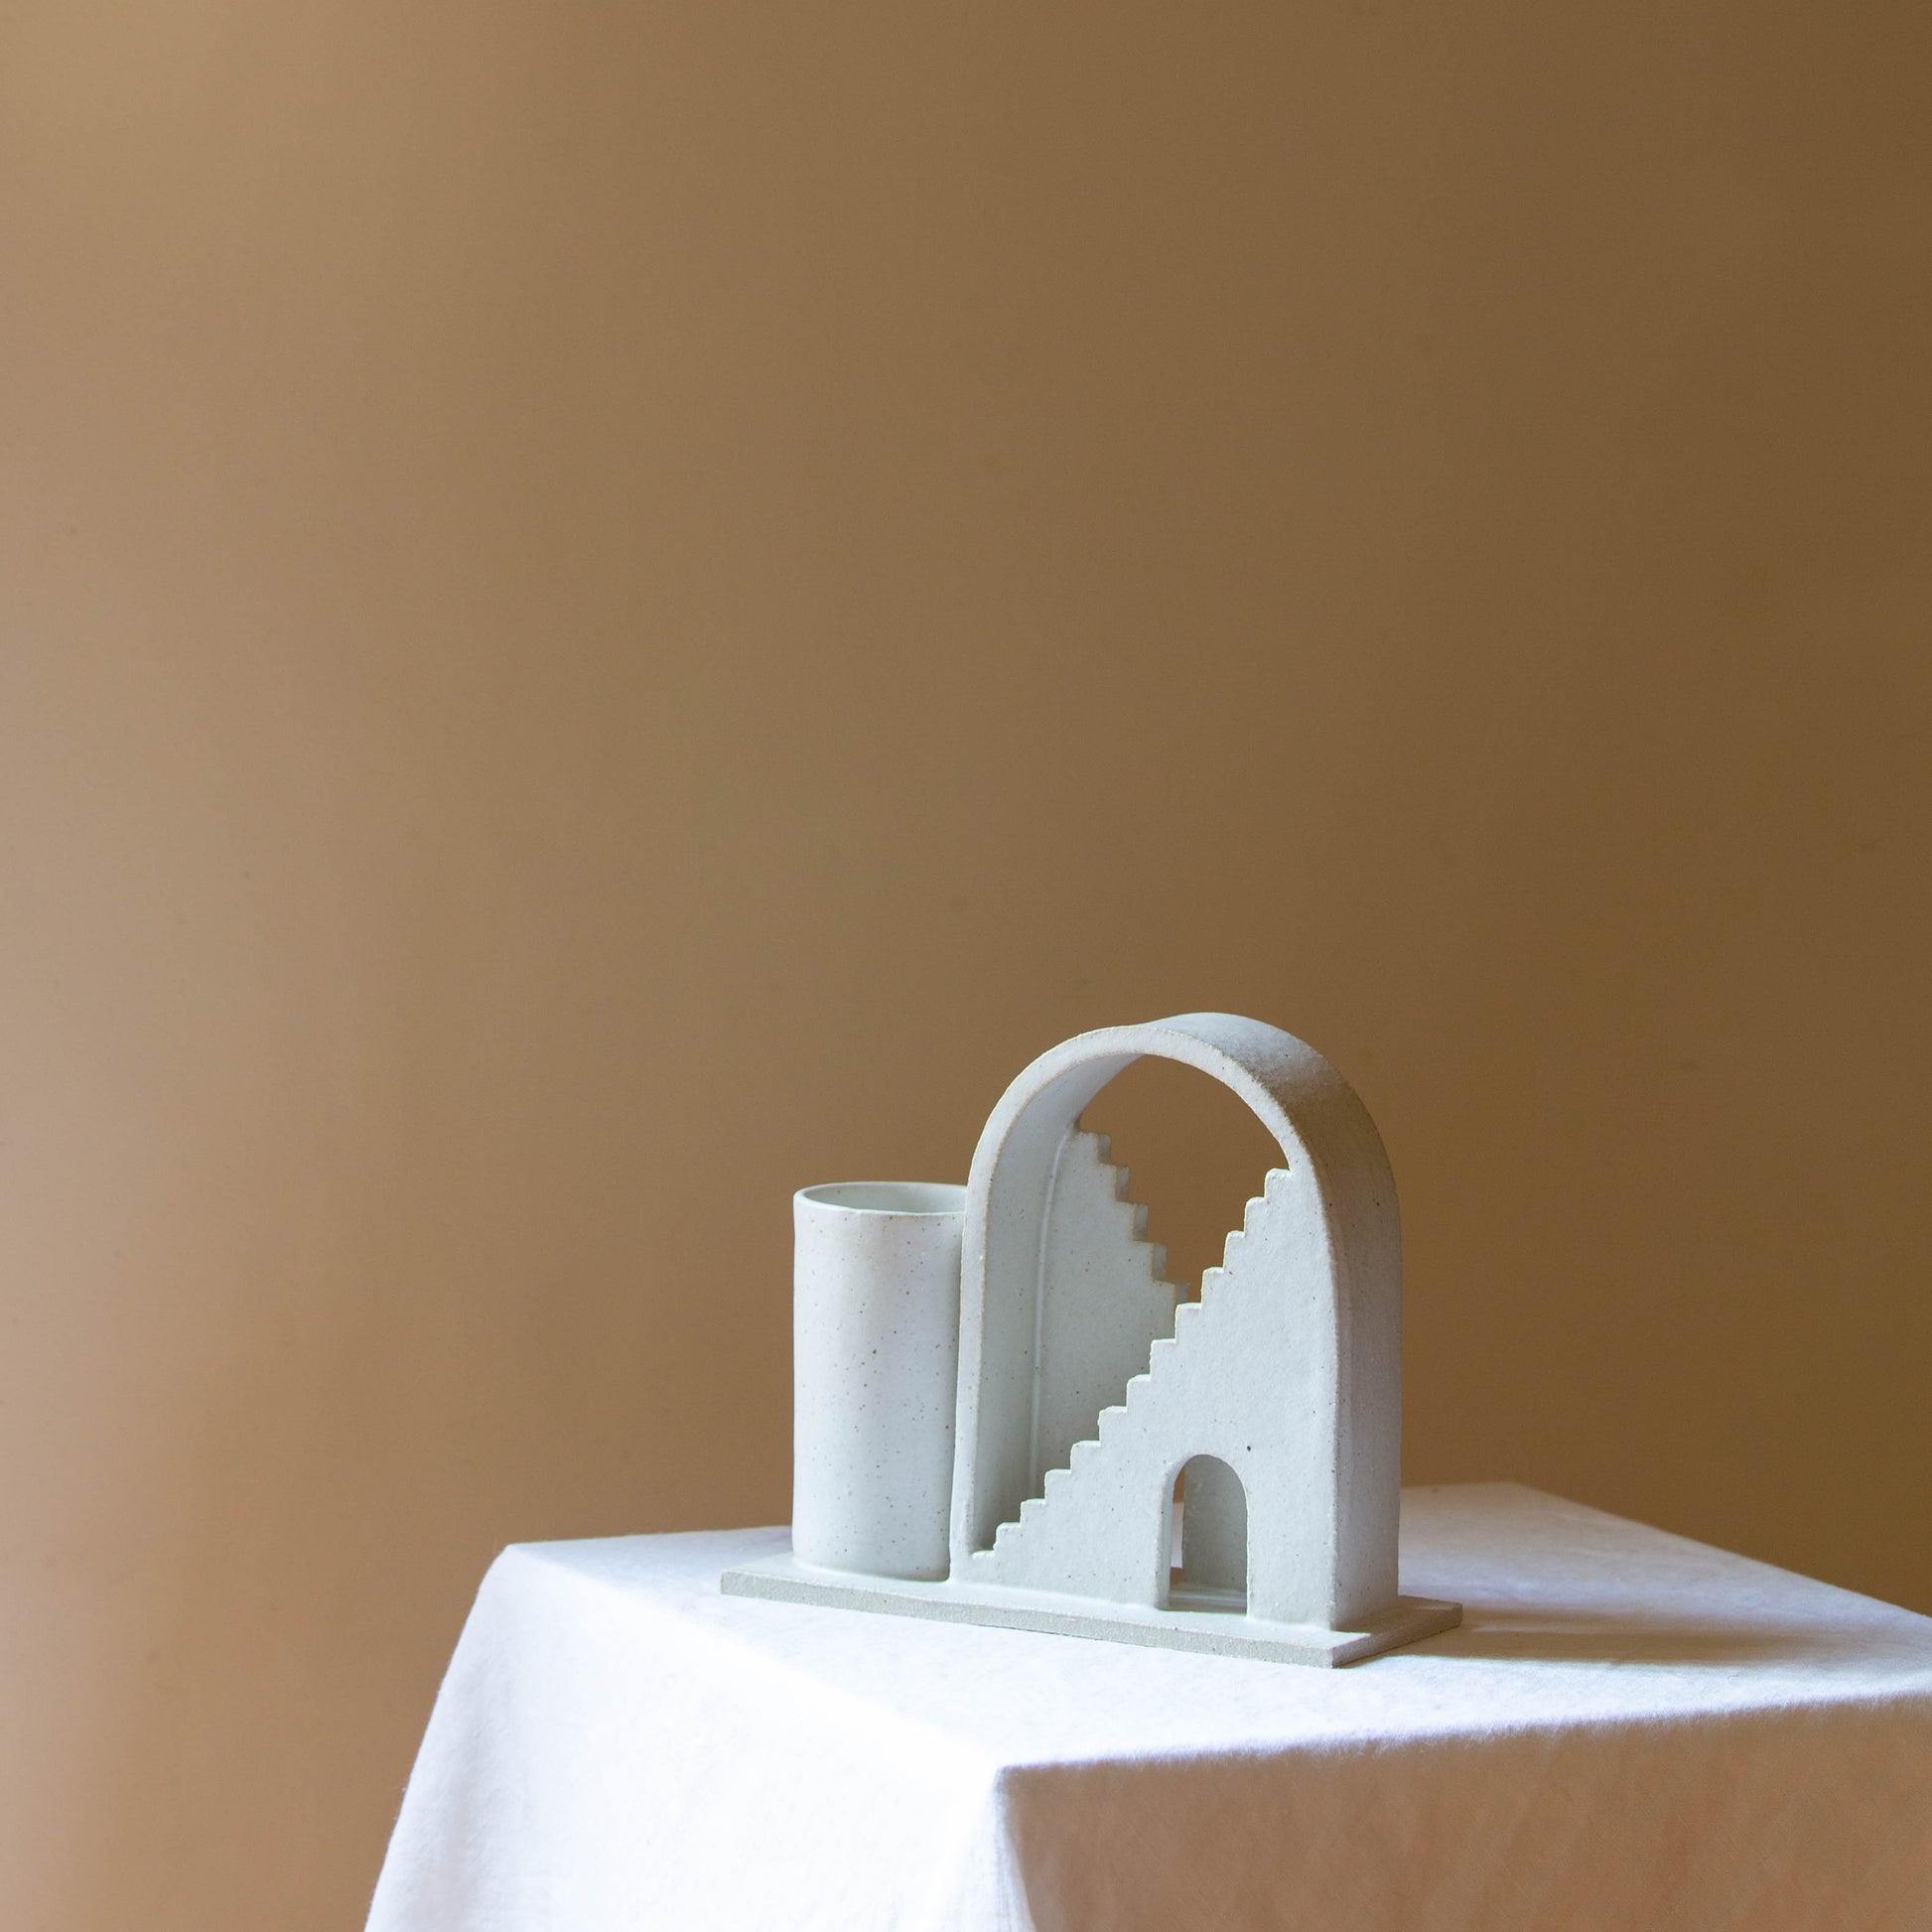 Handmade ceramic vase with arched detail and two mirrored staircases. The vase is finished in a white glaze. The budvase sits on a white plinth and is photographed on a cream background. 